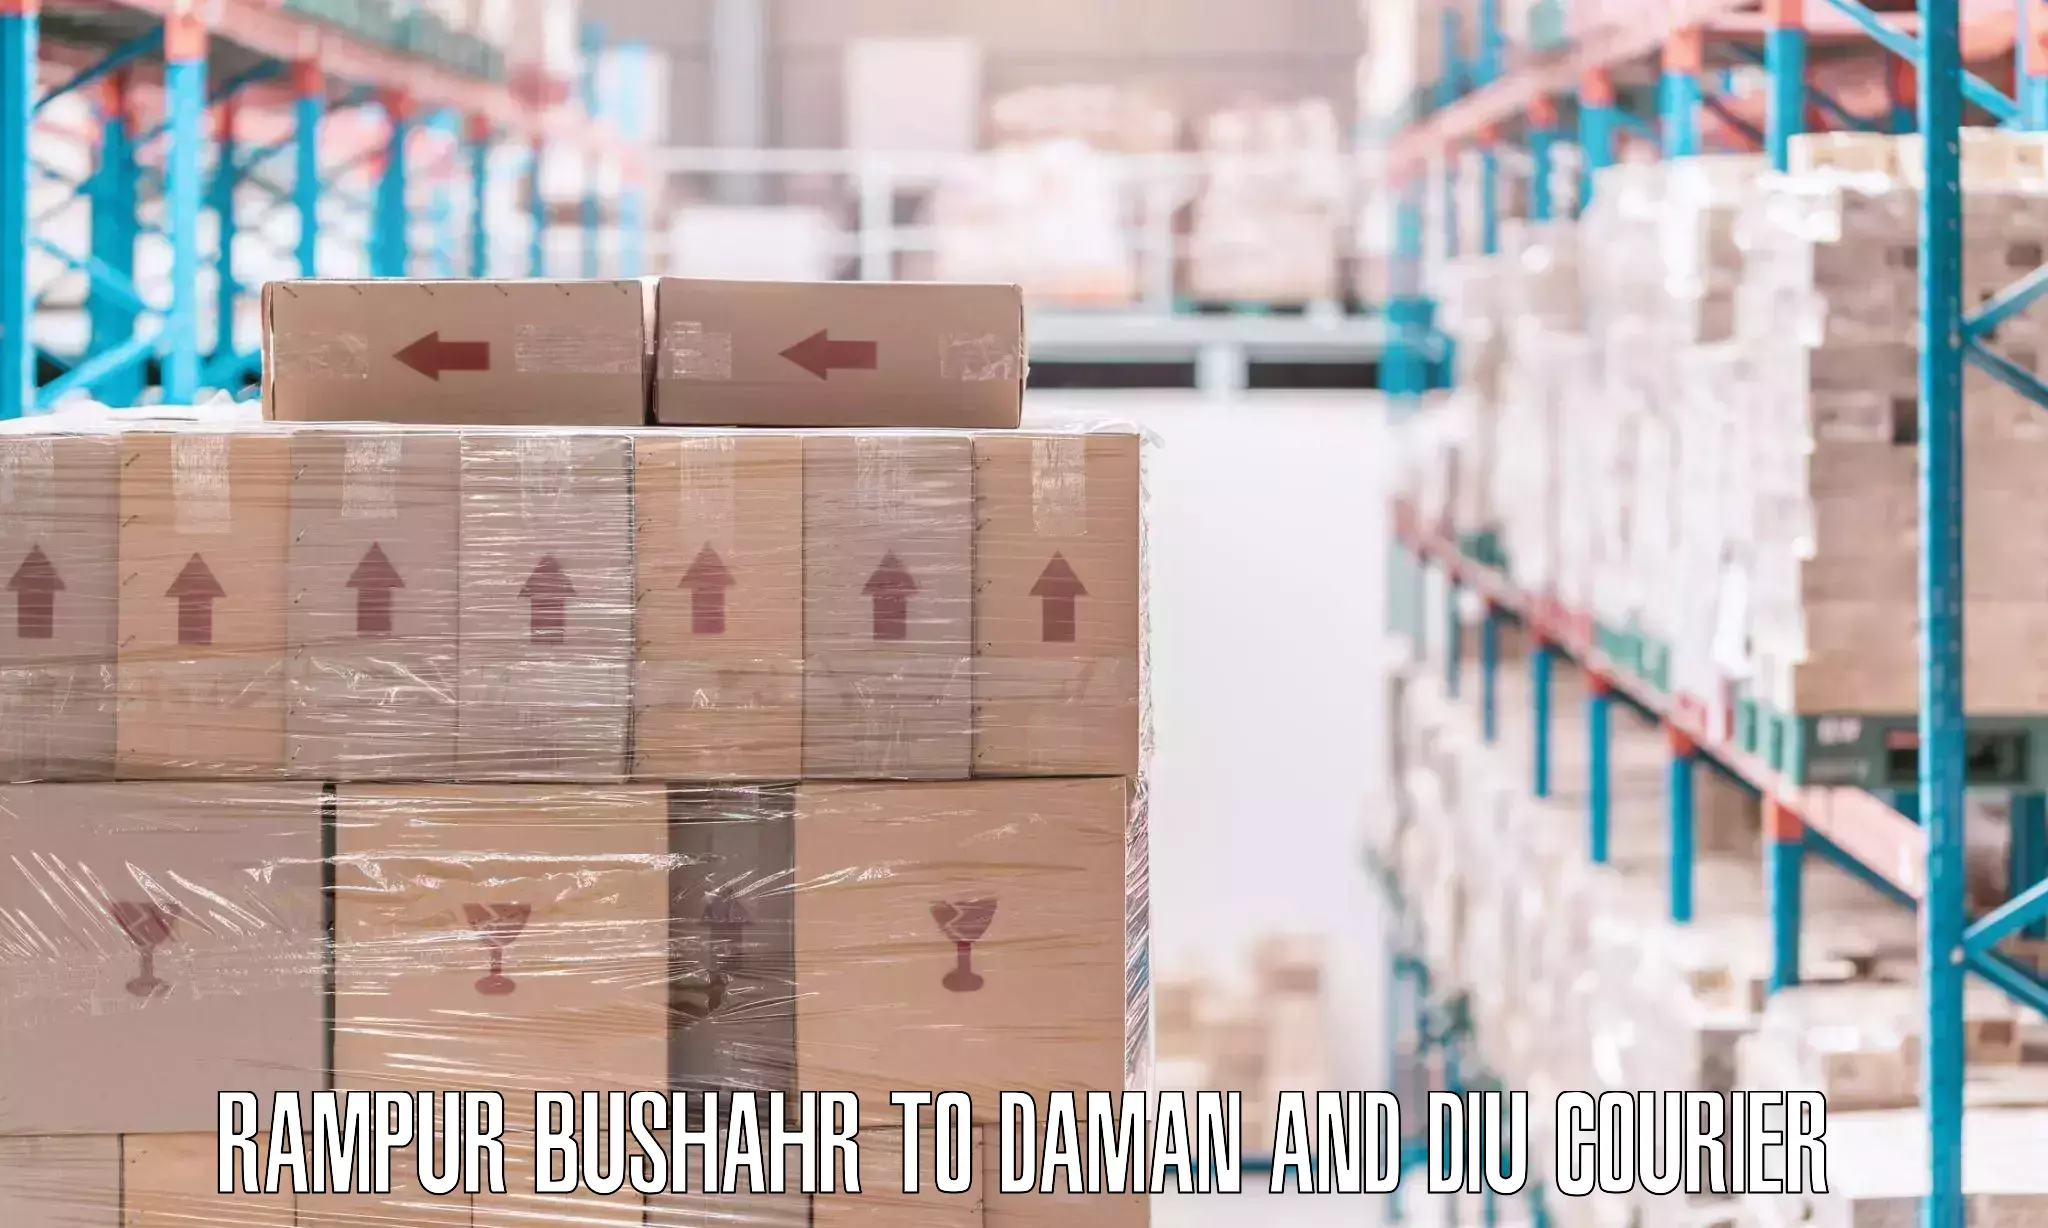 Moving and storage services Rampur Bushahr to Daman and Diu